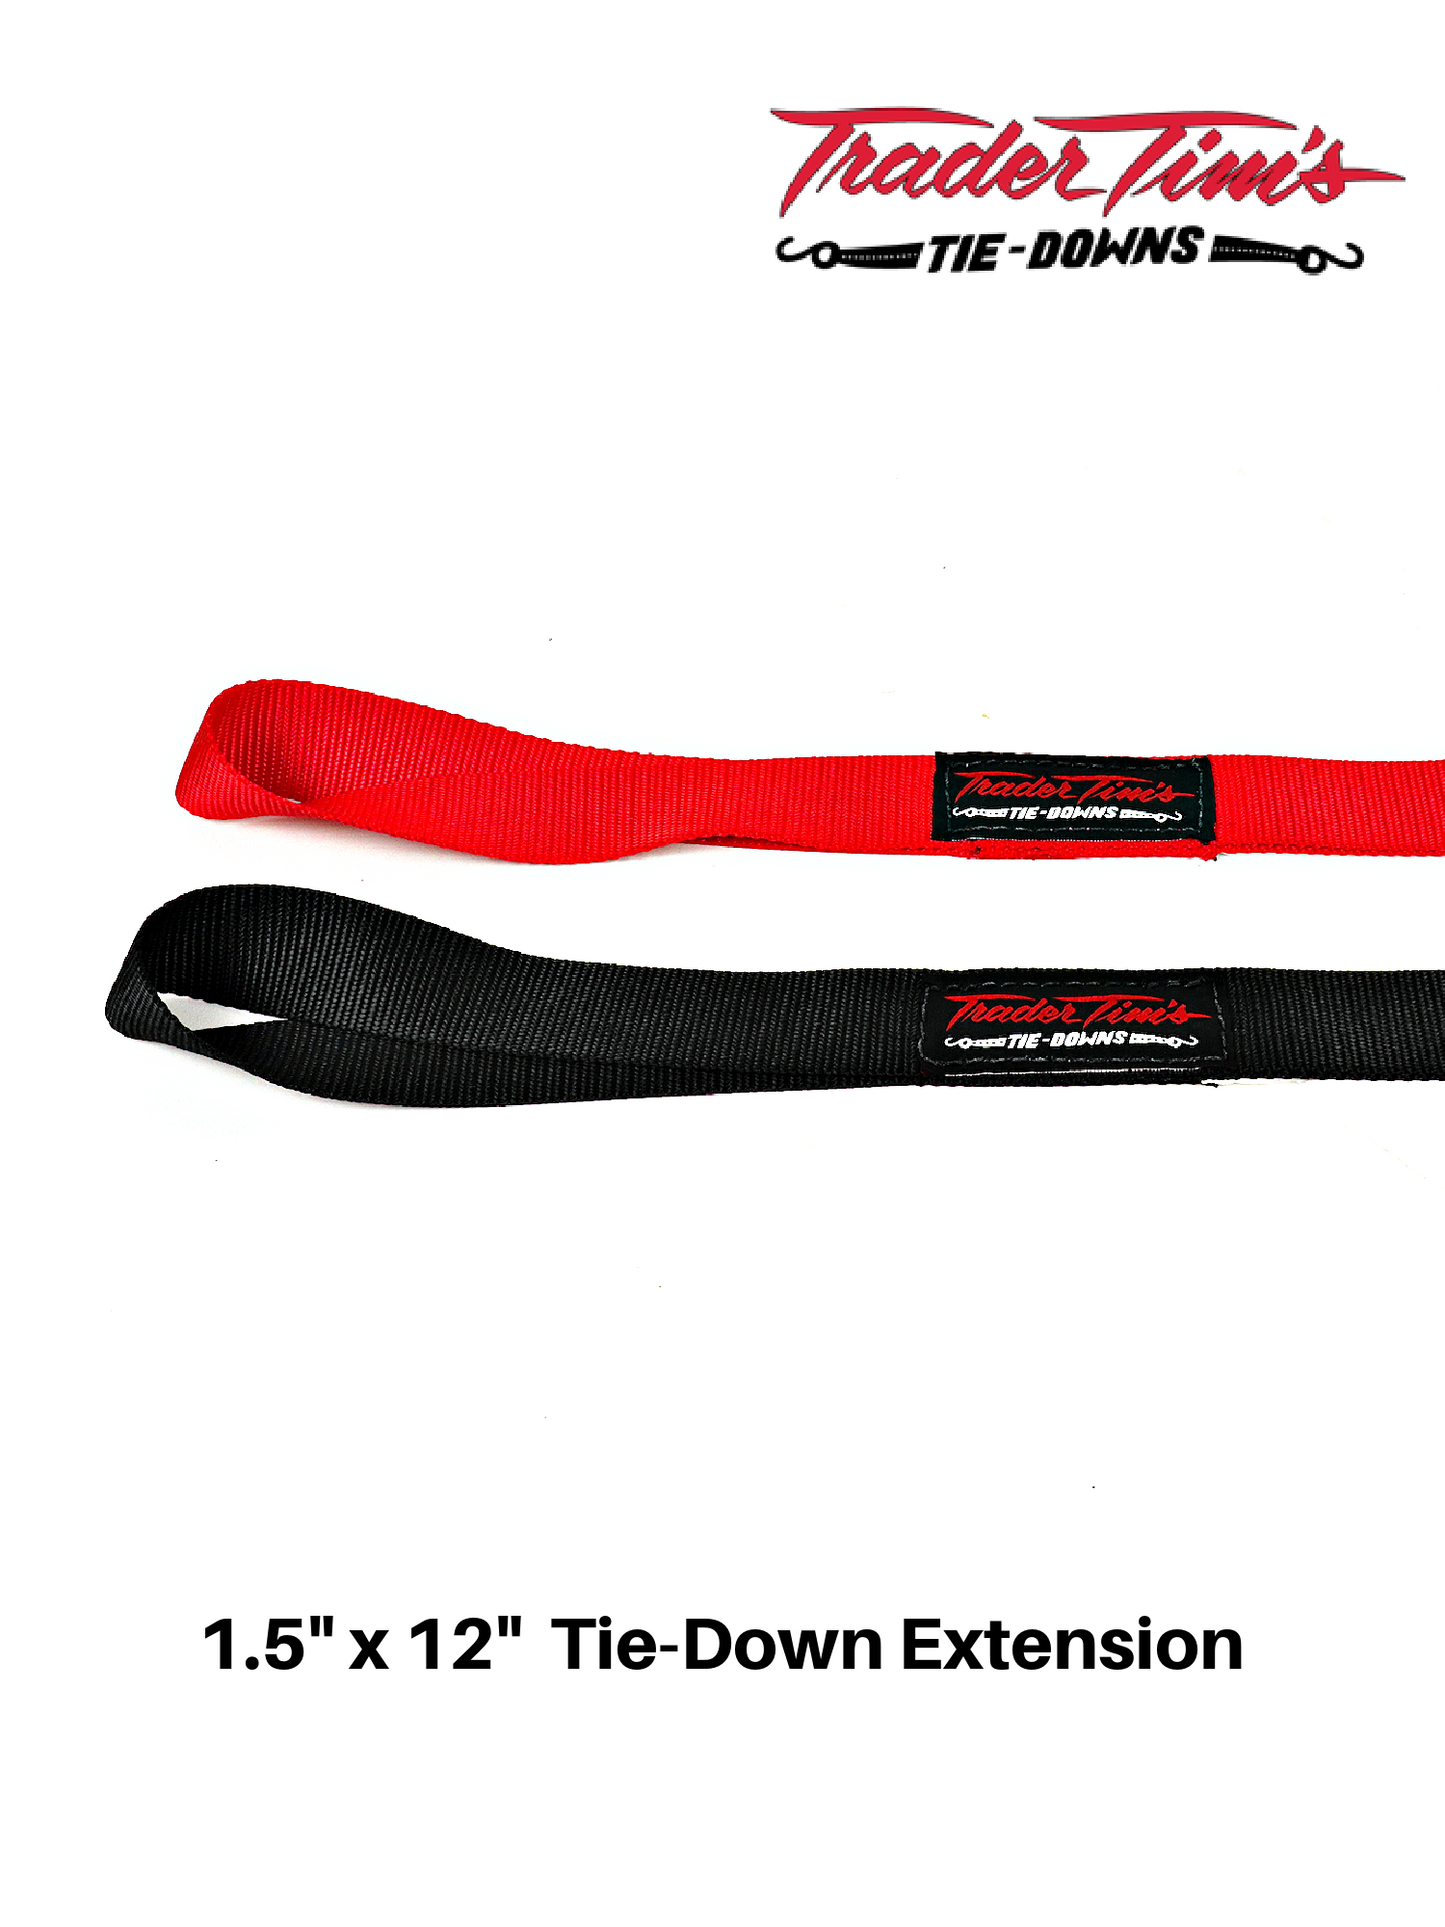 1.5" x 12" Soft Tie-Down Extension - Red or Black